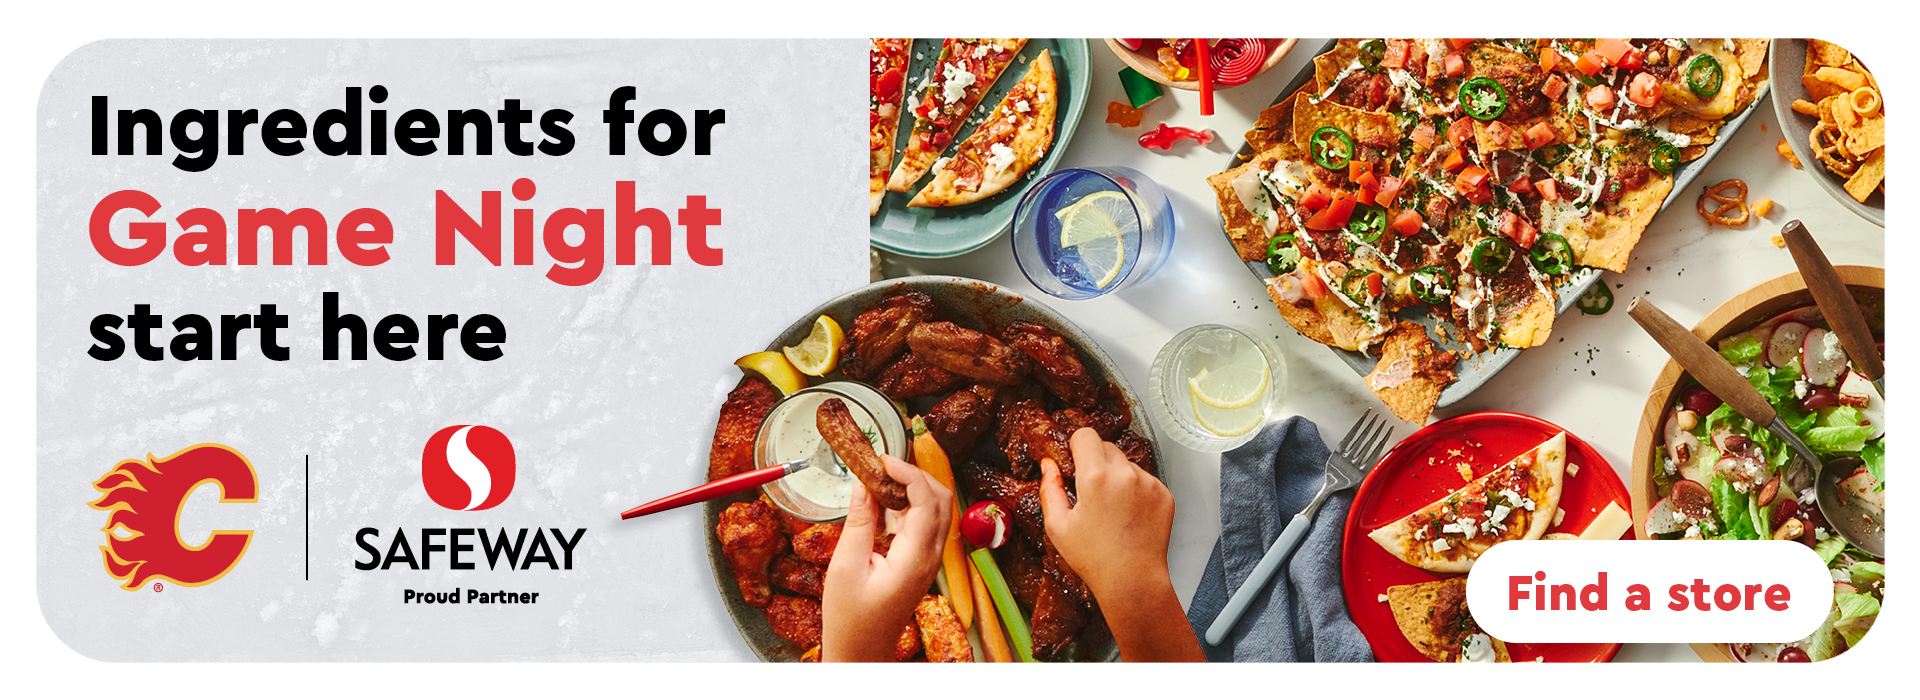 Text reading 'Ingredients for Game Night start here. Safeway- Proud Partner. 'Find a store' by clicking on the link at right.'